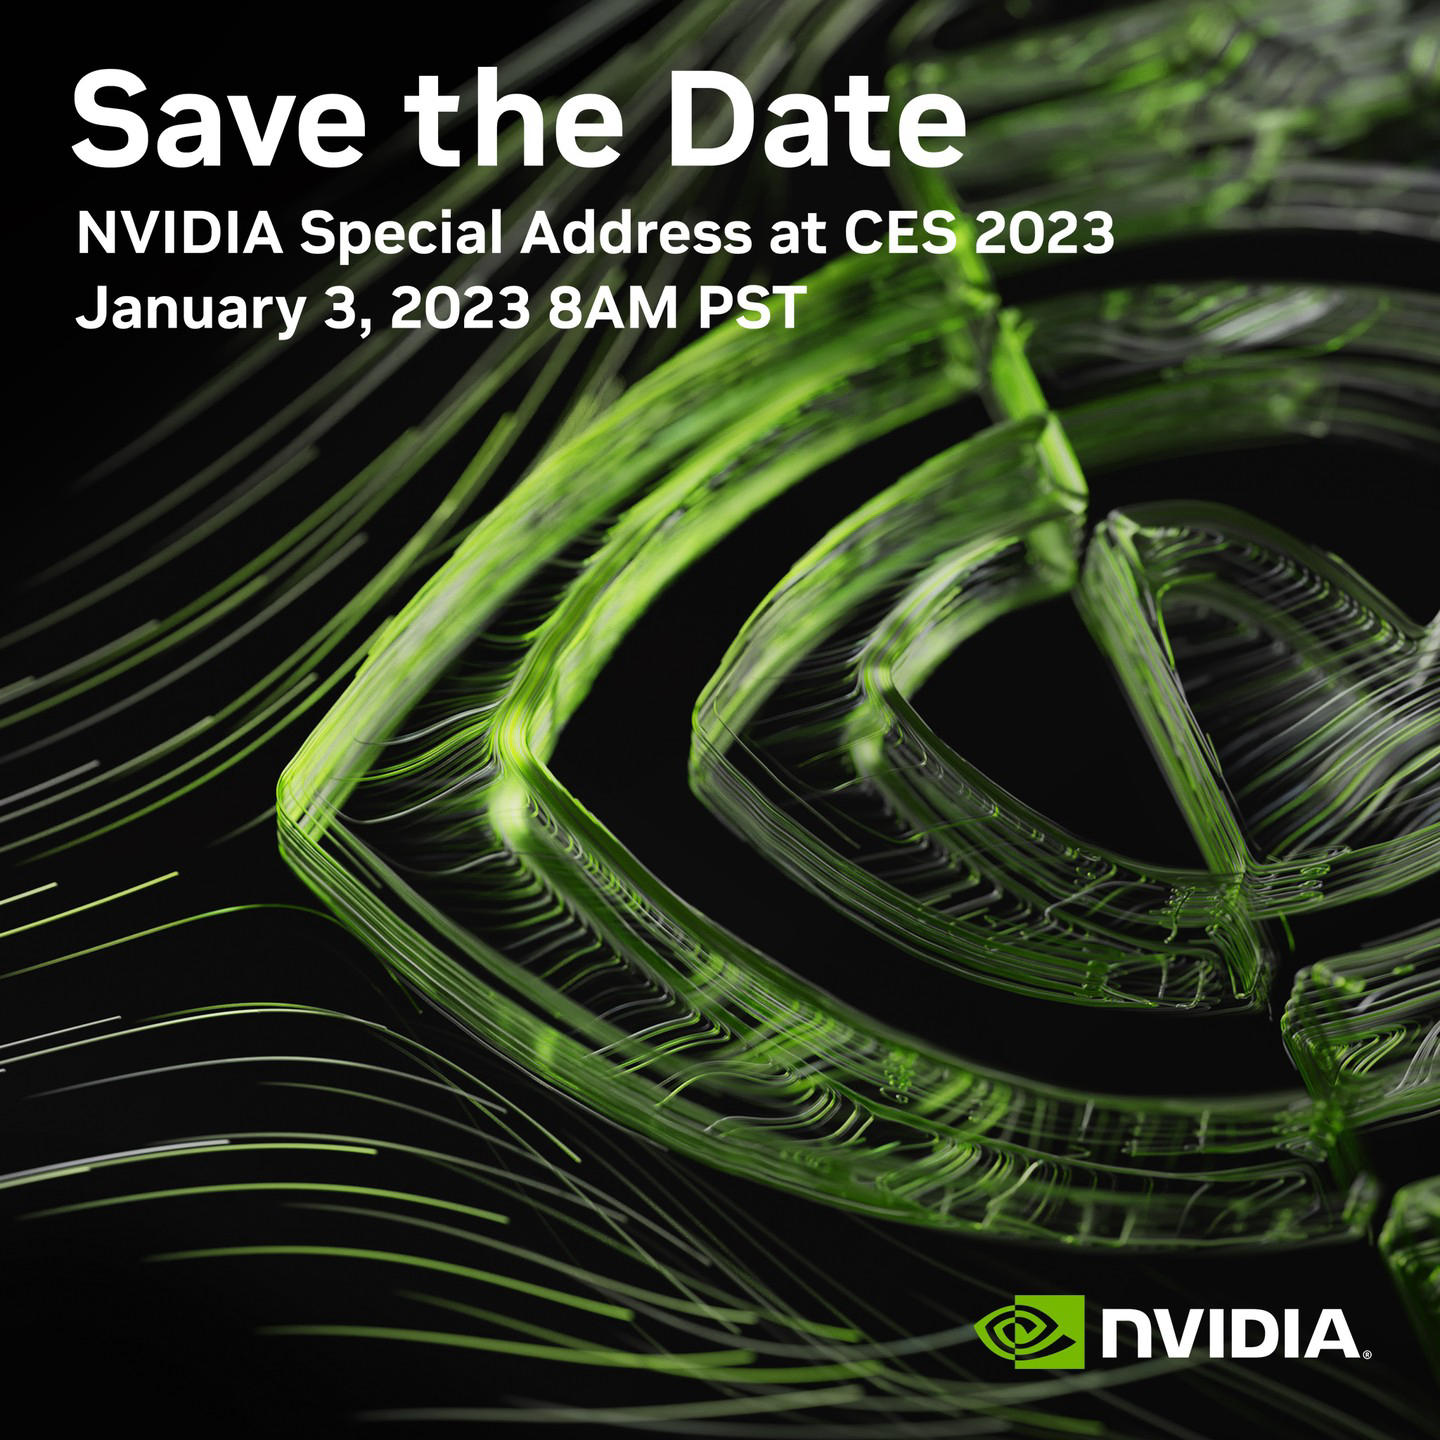 NVIDIA - Join us for our virtual NVIDIA Special Address at #CES2023 on Tuesday, Jan